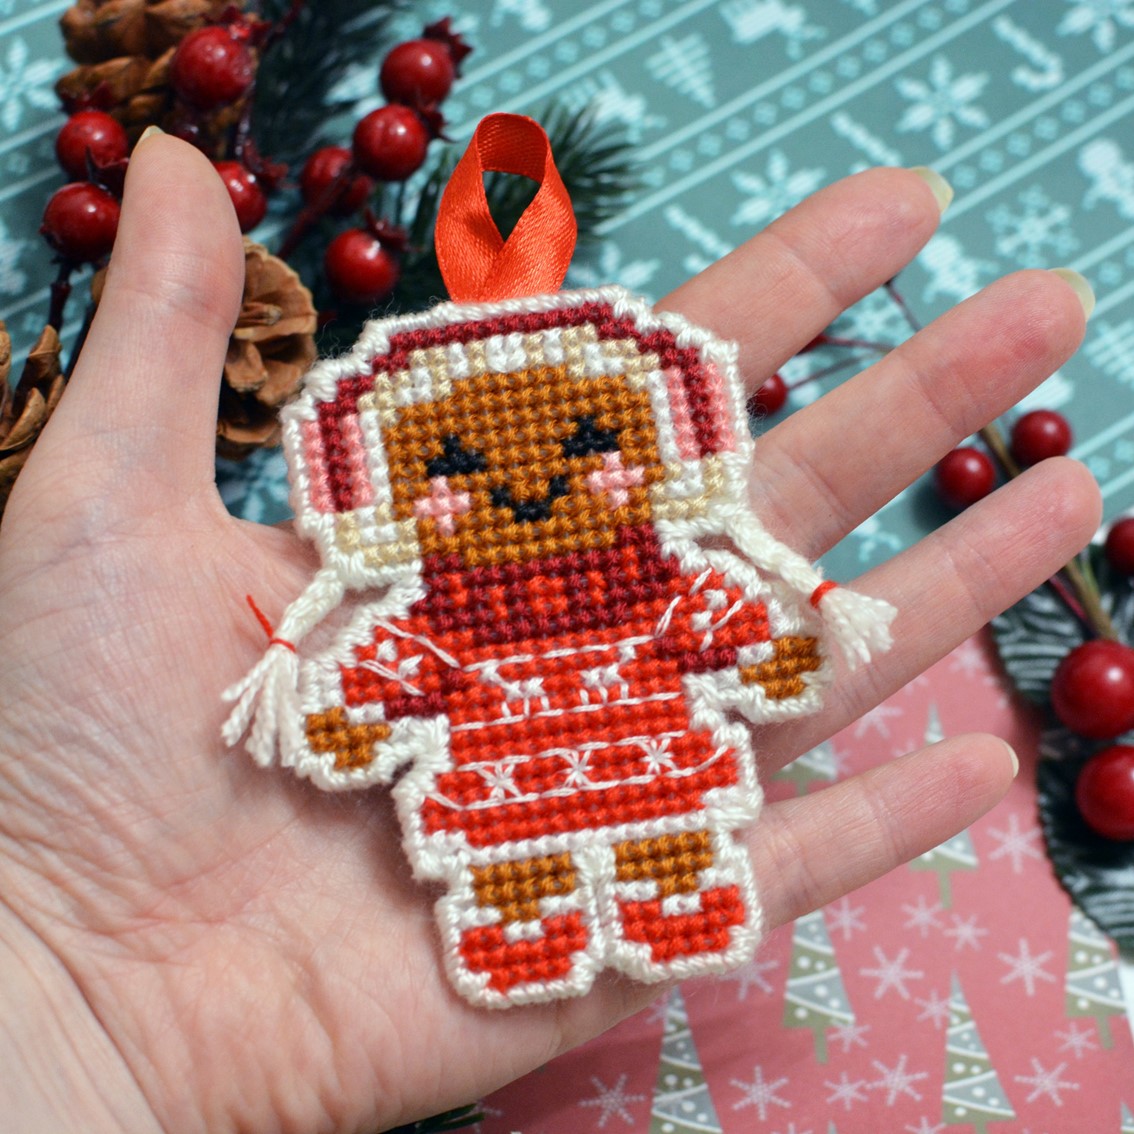 Gingerbread girl: plastic canvas pattern and tutorial for Christmas tree decoration, easy plastic canvas project for beginners, cute DIY gift idea for winter holidays. Digital cross stitch pattern by Smasterilli